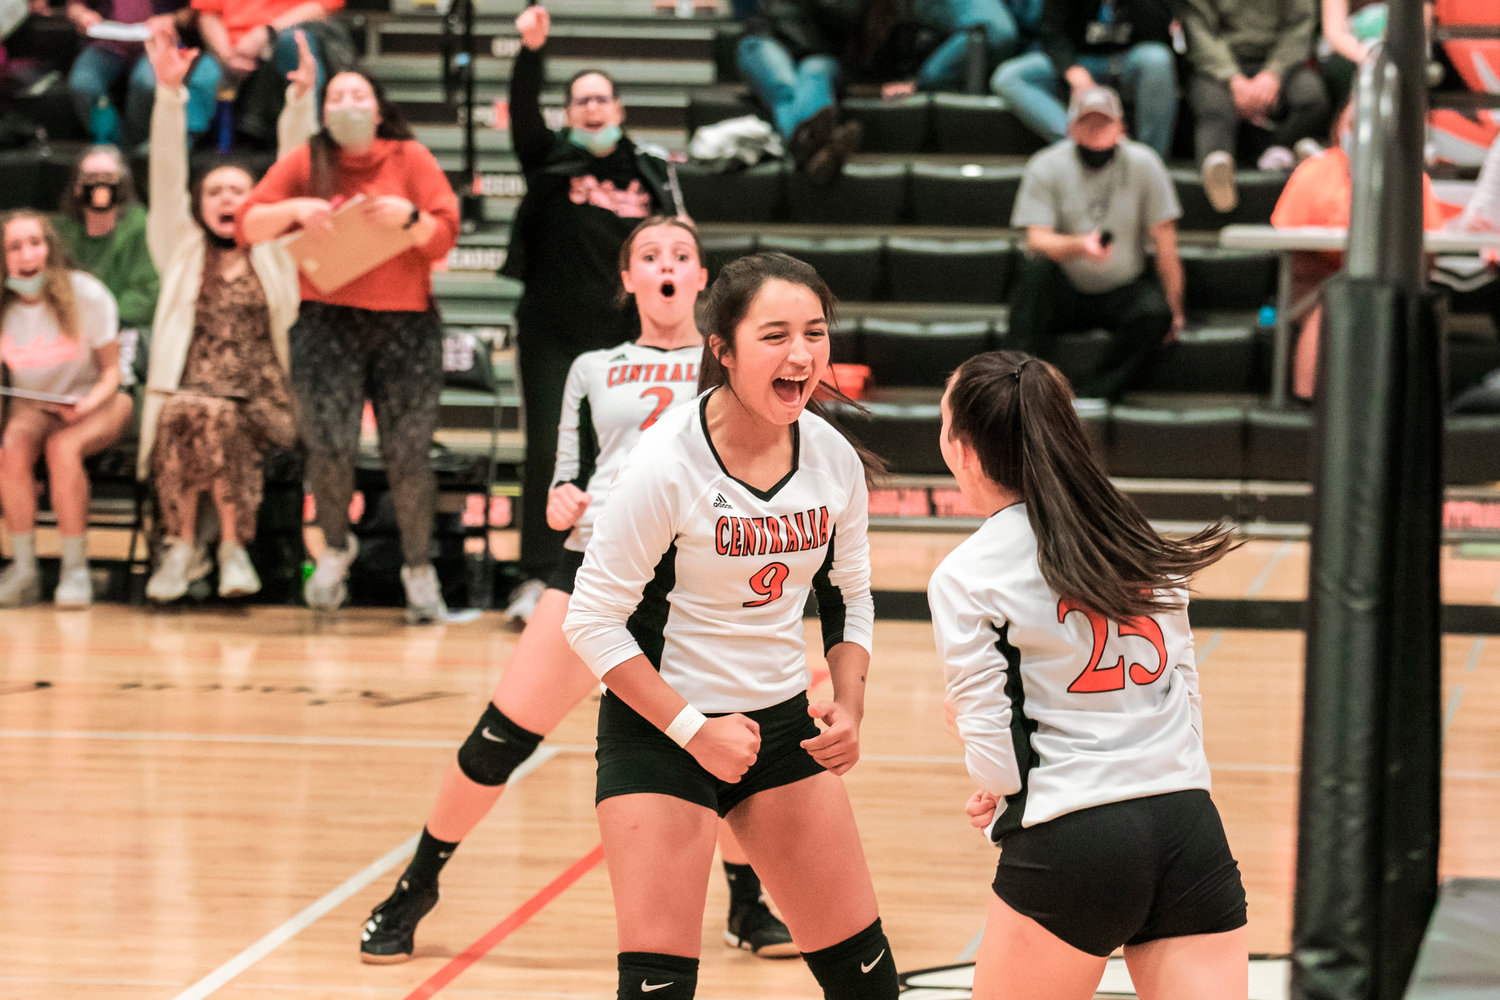 Centralia’s Makayla Chavez (9) celebrates with teammates after scoring during a match against Rochester Wednesday evening.